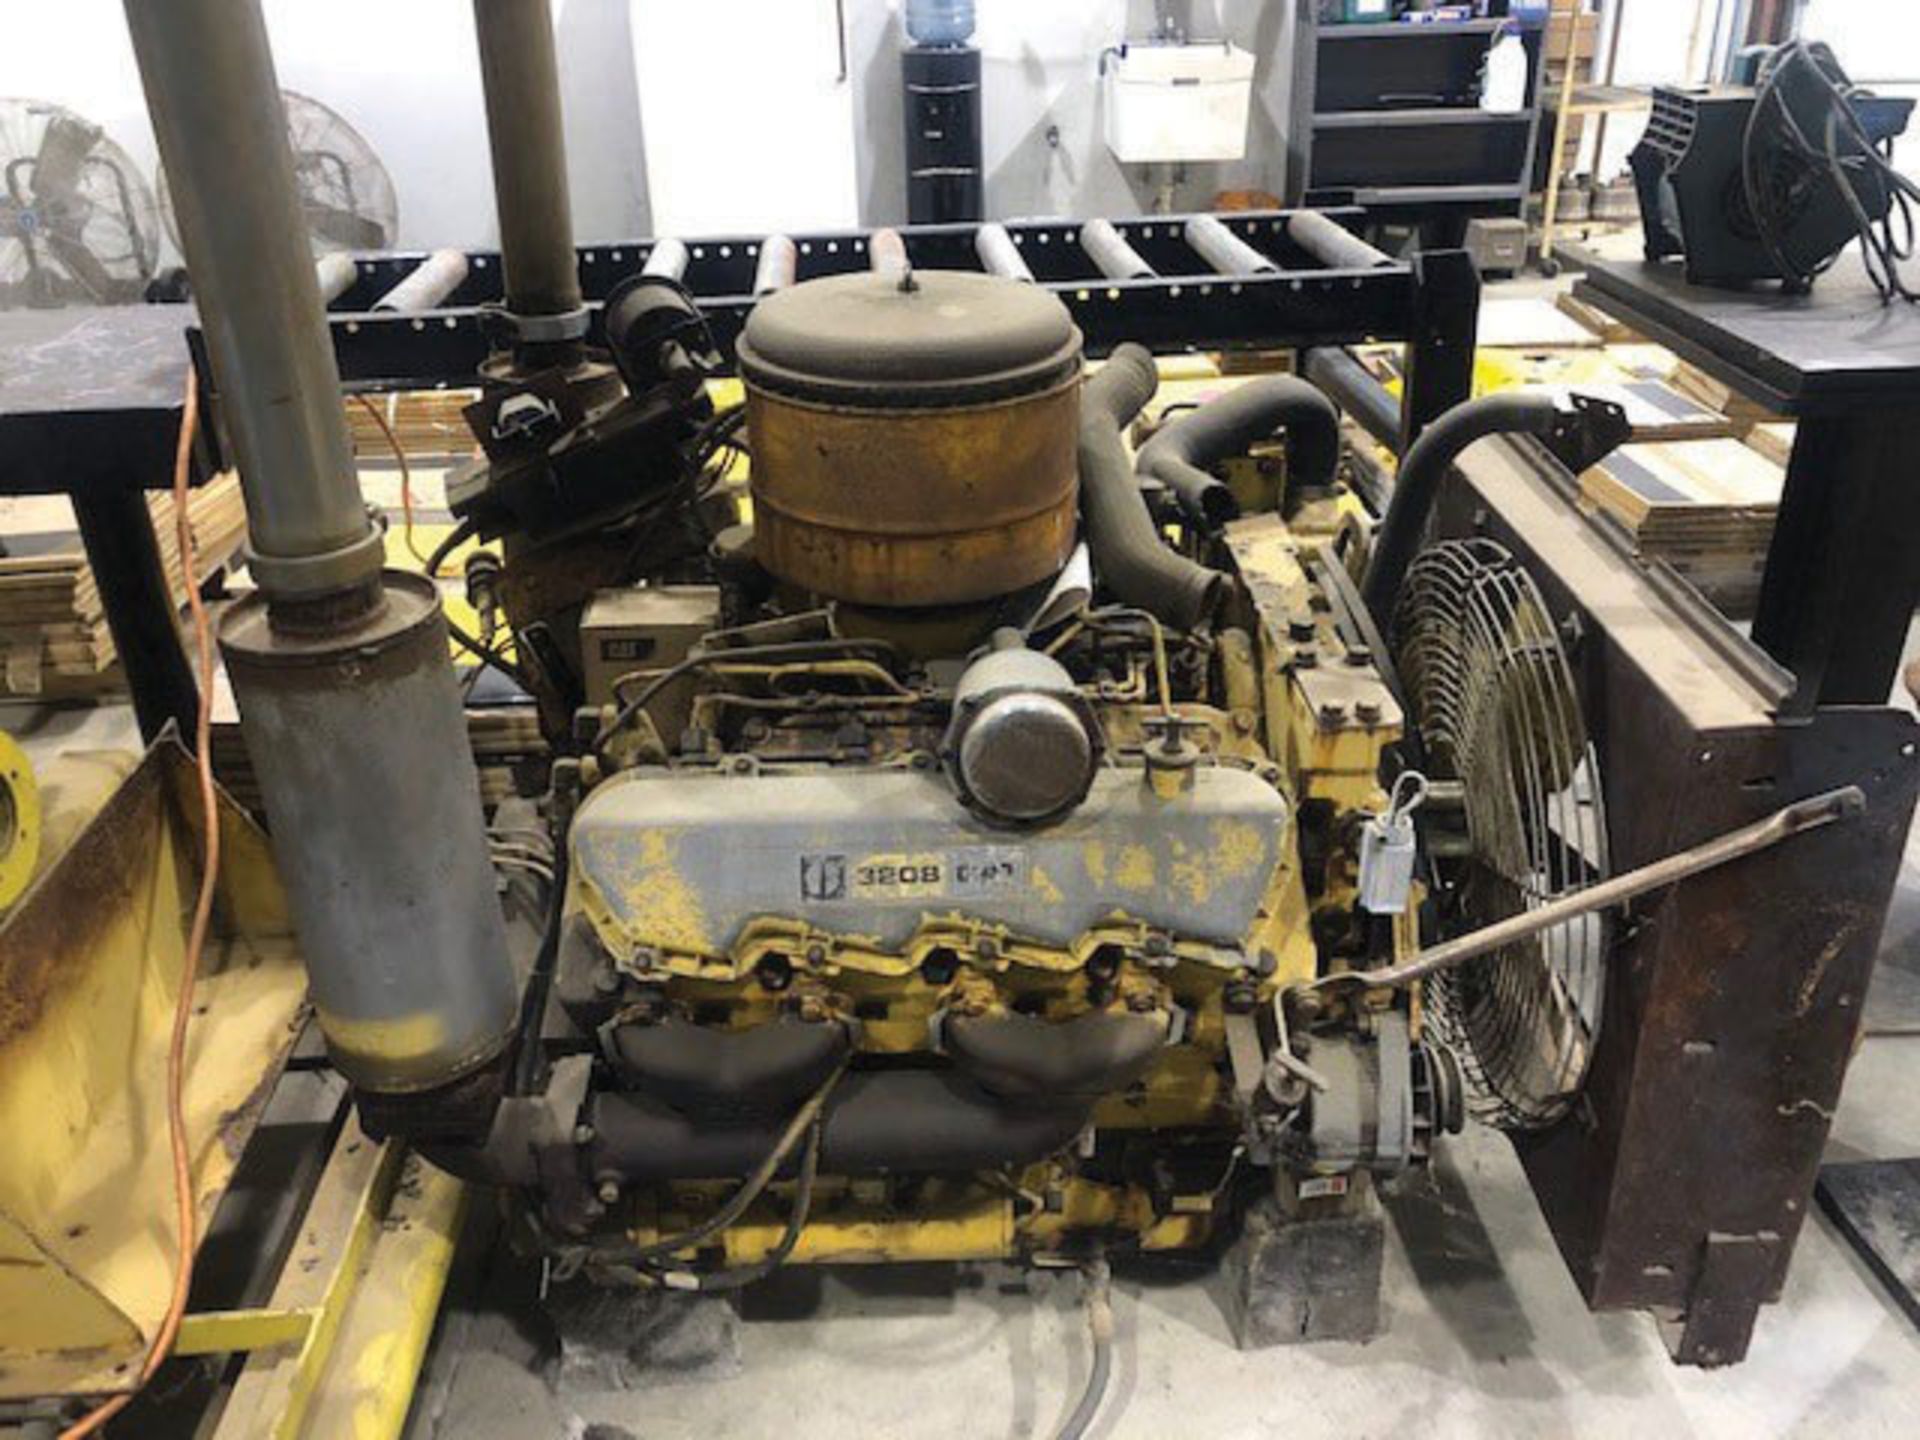 75 W CATERPILLAR 3160 GENERATOR, MODEL 8L6245, S/N 63795-45, 3 PHASE, WITH A 3208 ENGINE, BOTH ENGIN - Image 2 of 2